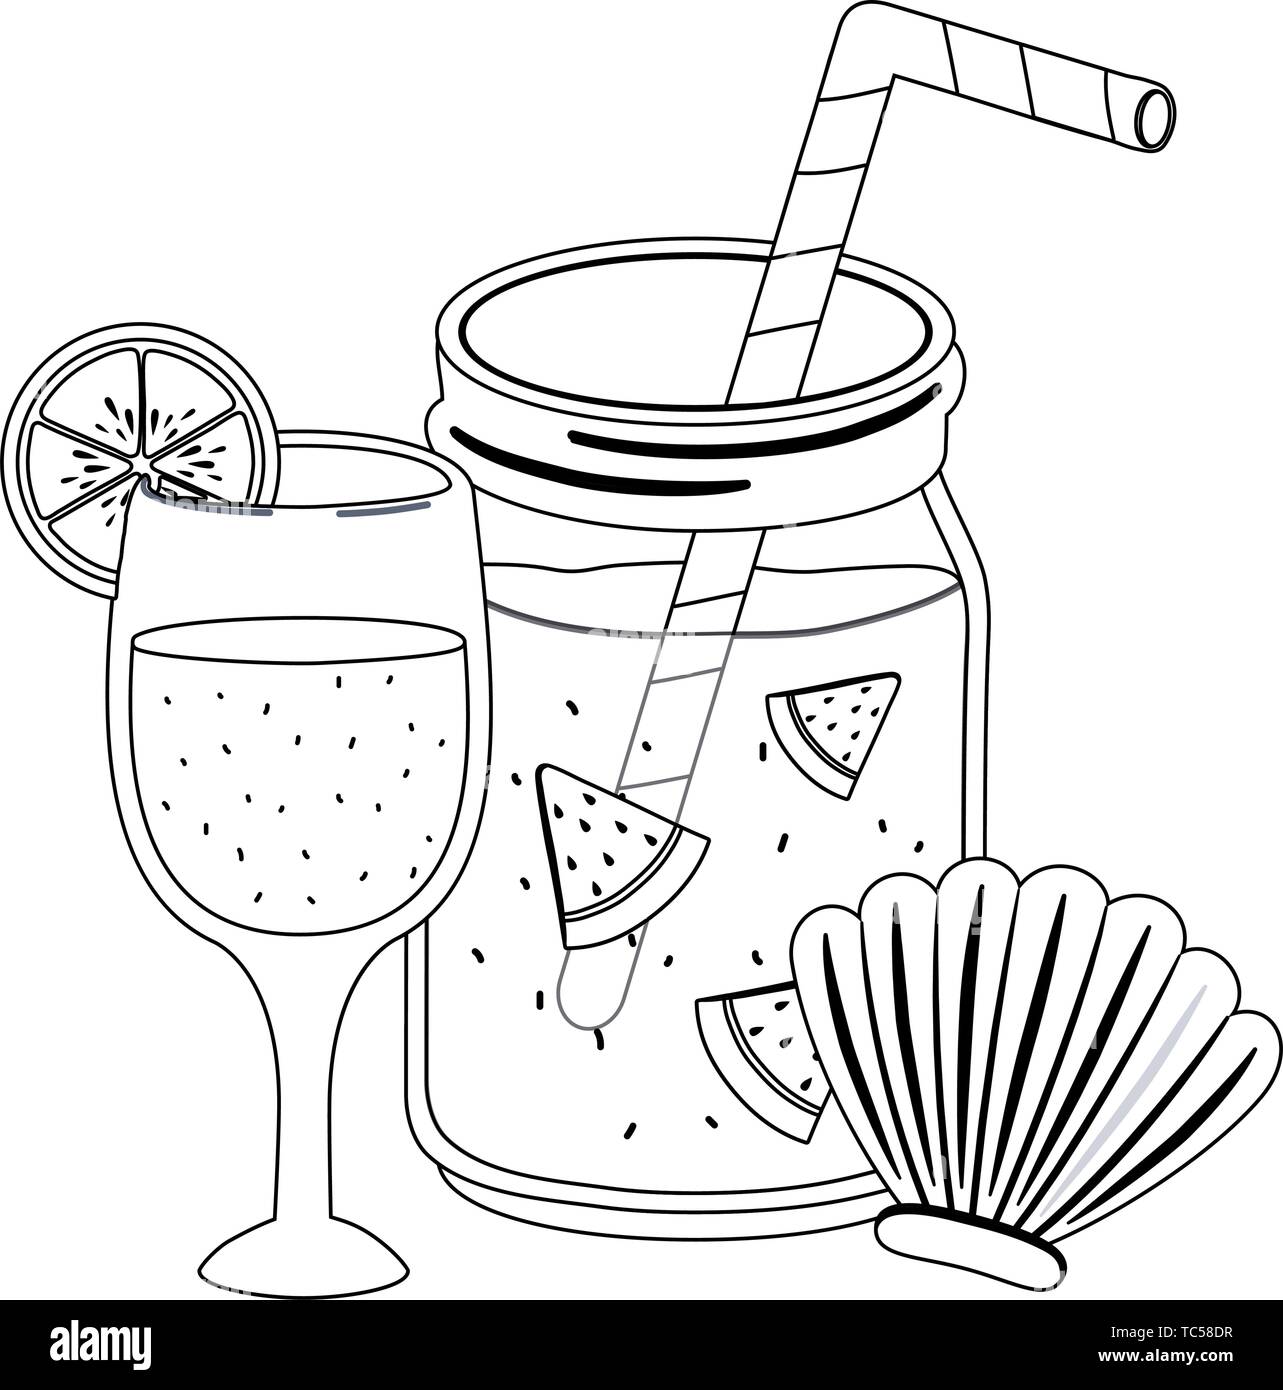 Drinks drawing Stock Photos, Royalty Free Drinks drawing Images |  Depositphotos